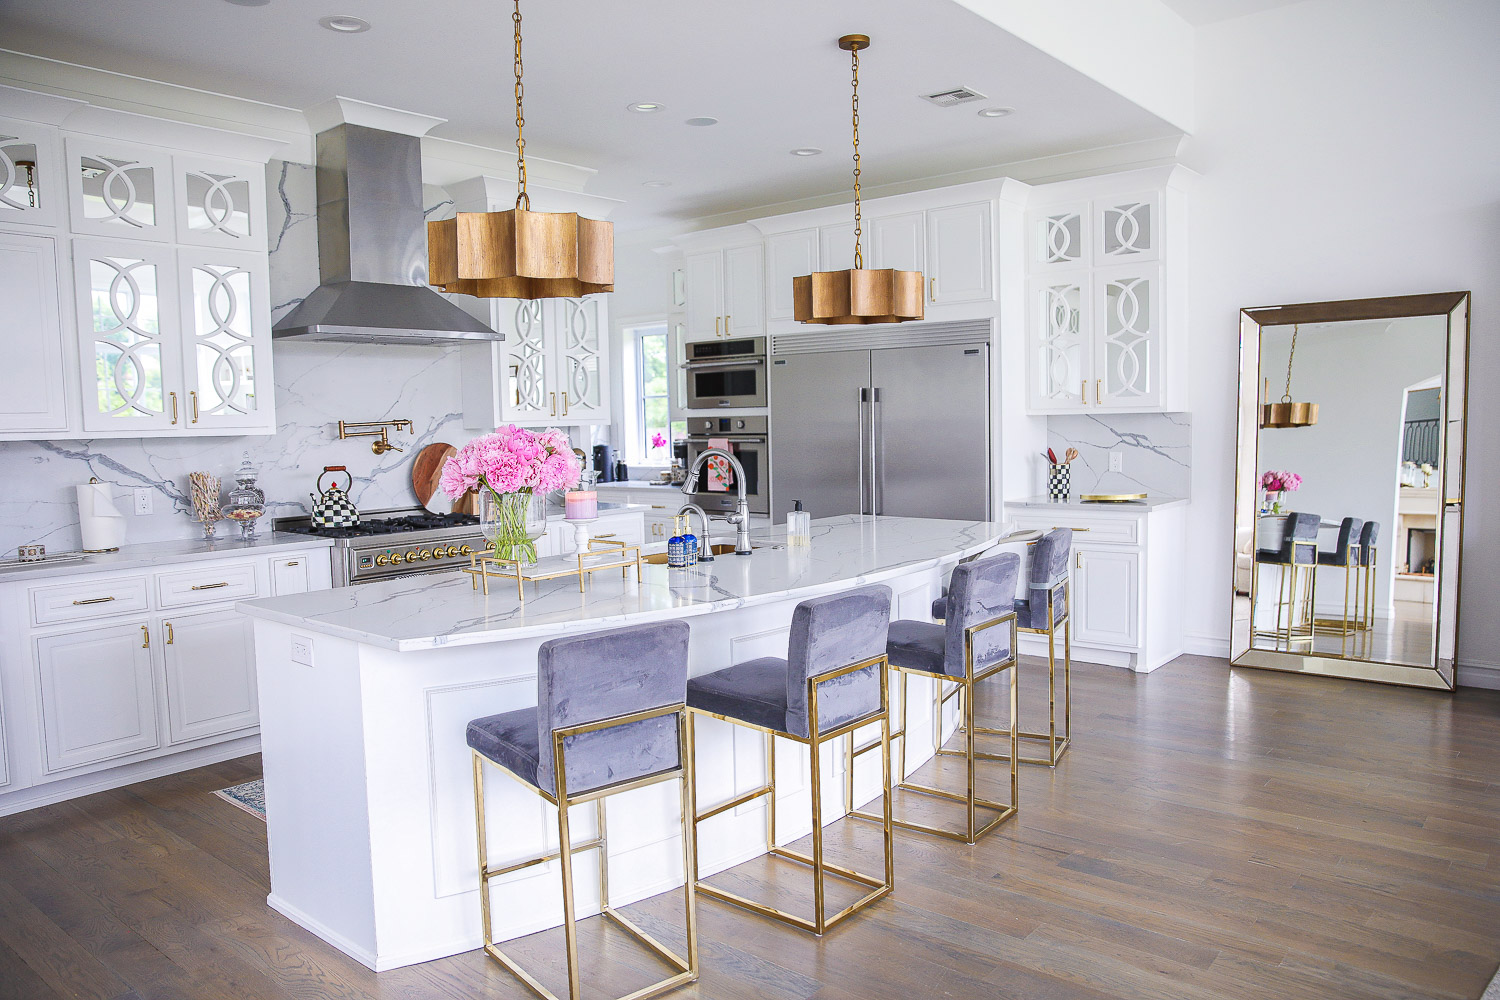 Spring Kitchen by popular US life and style blog: image of a kitchen with white cabinets, wood flooring, wooden light pendants, marble counter tops, gold and grey velvet bar stools, and light pink and blue runner rug. 